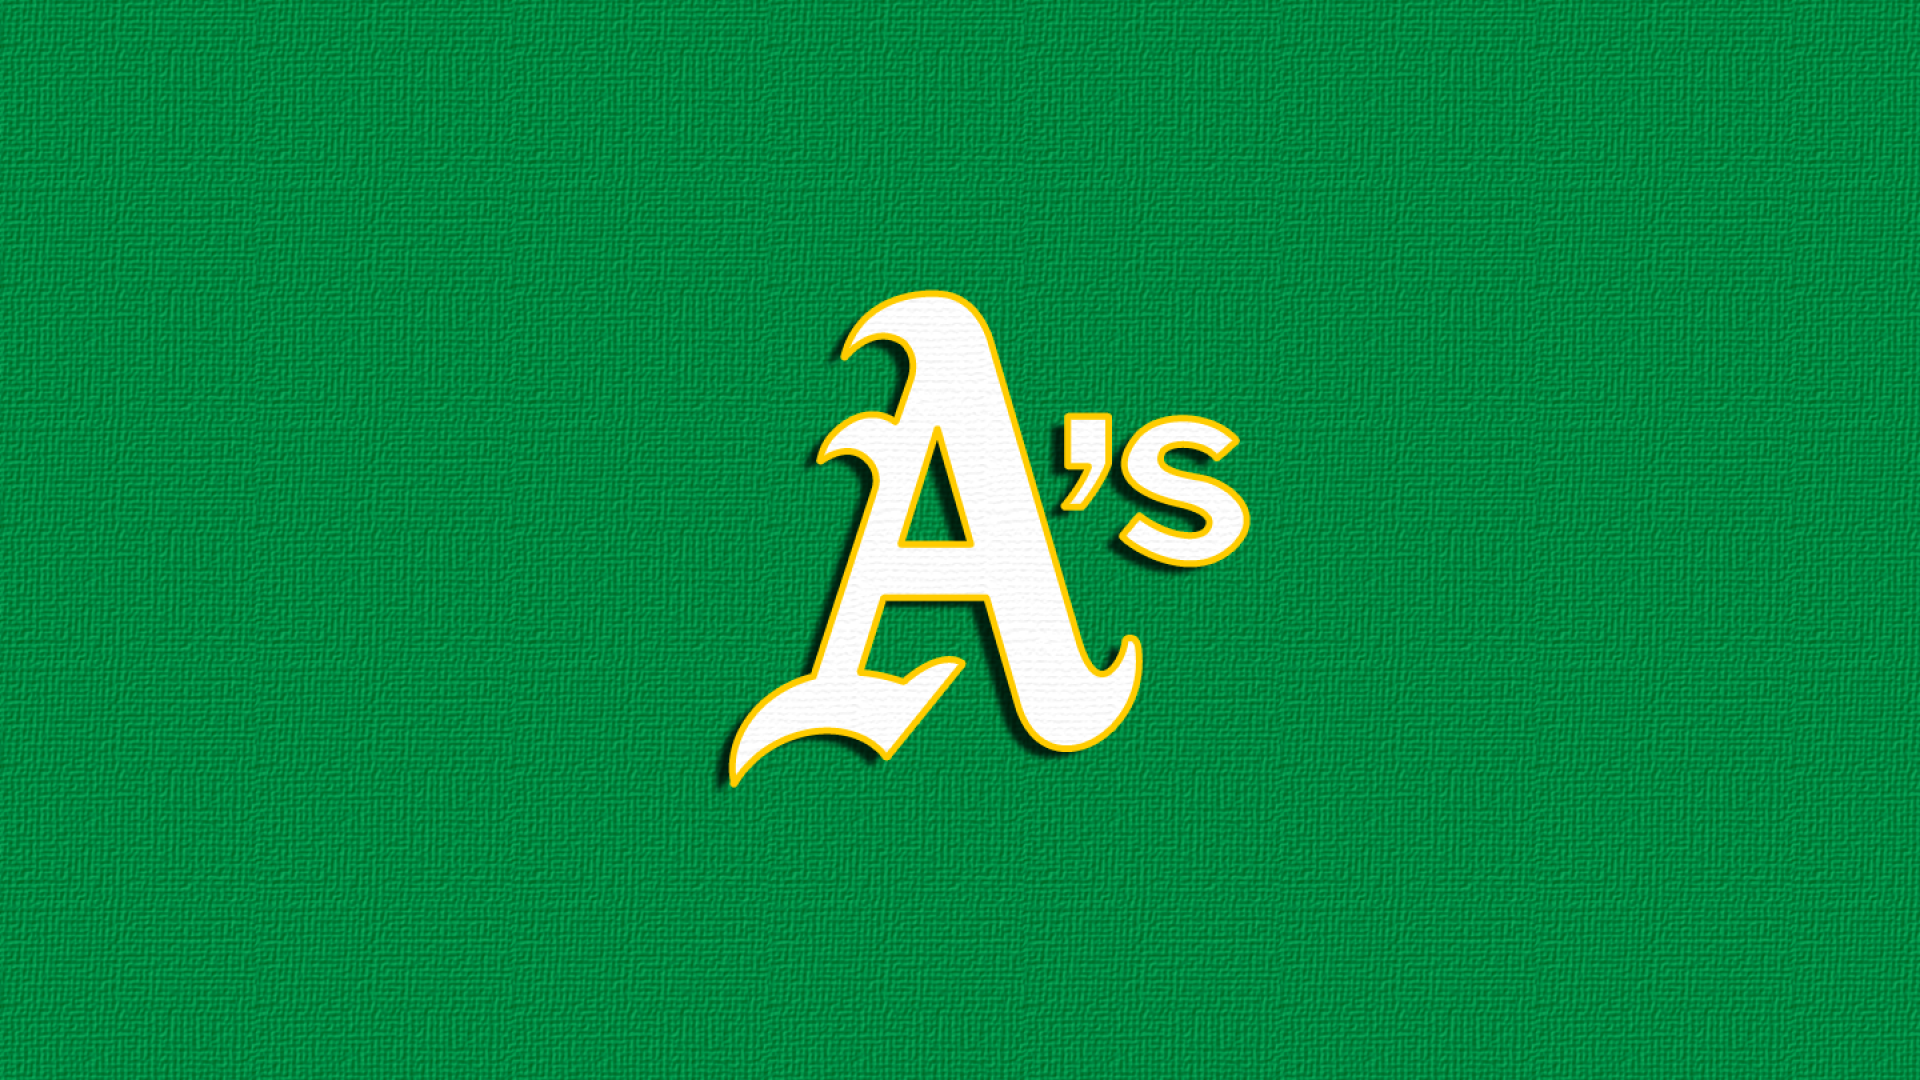 Oakland Athletics Browser Themes Desktop Wallpapers More